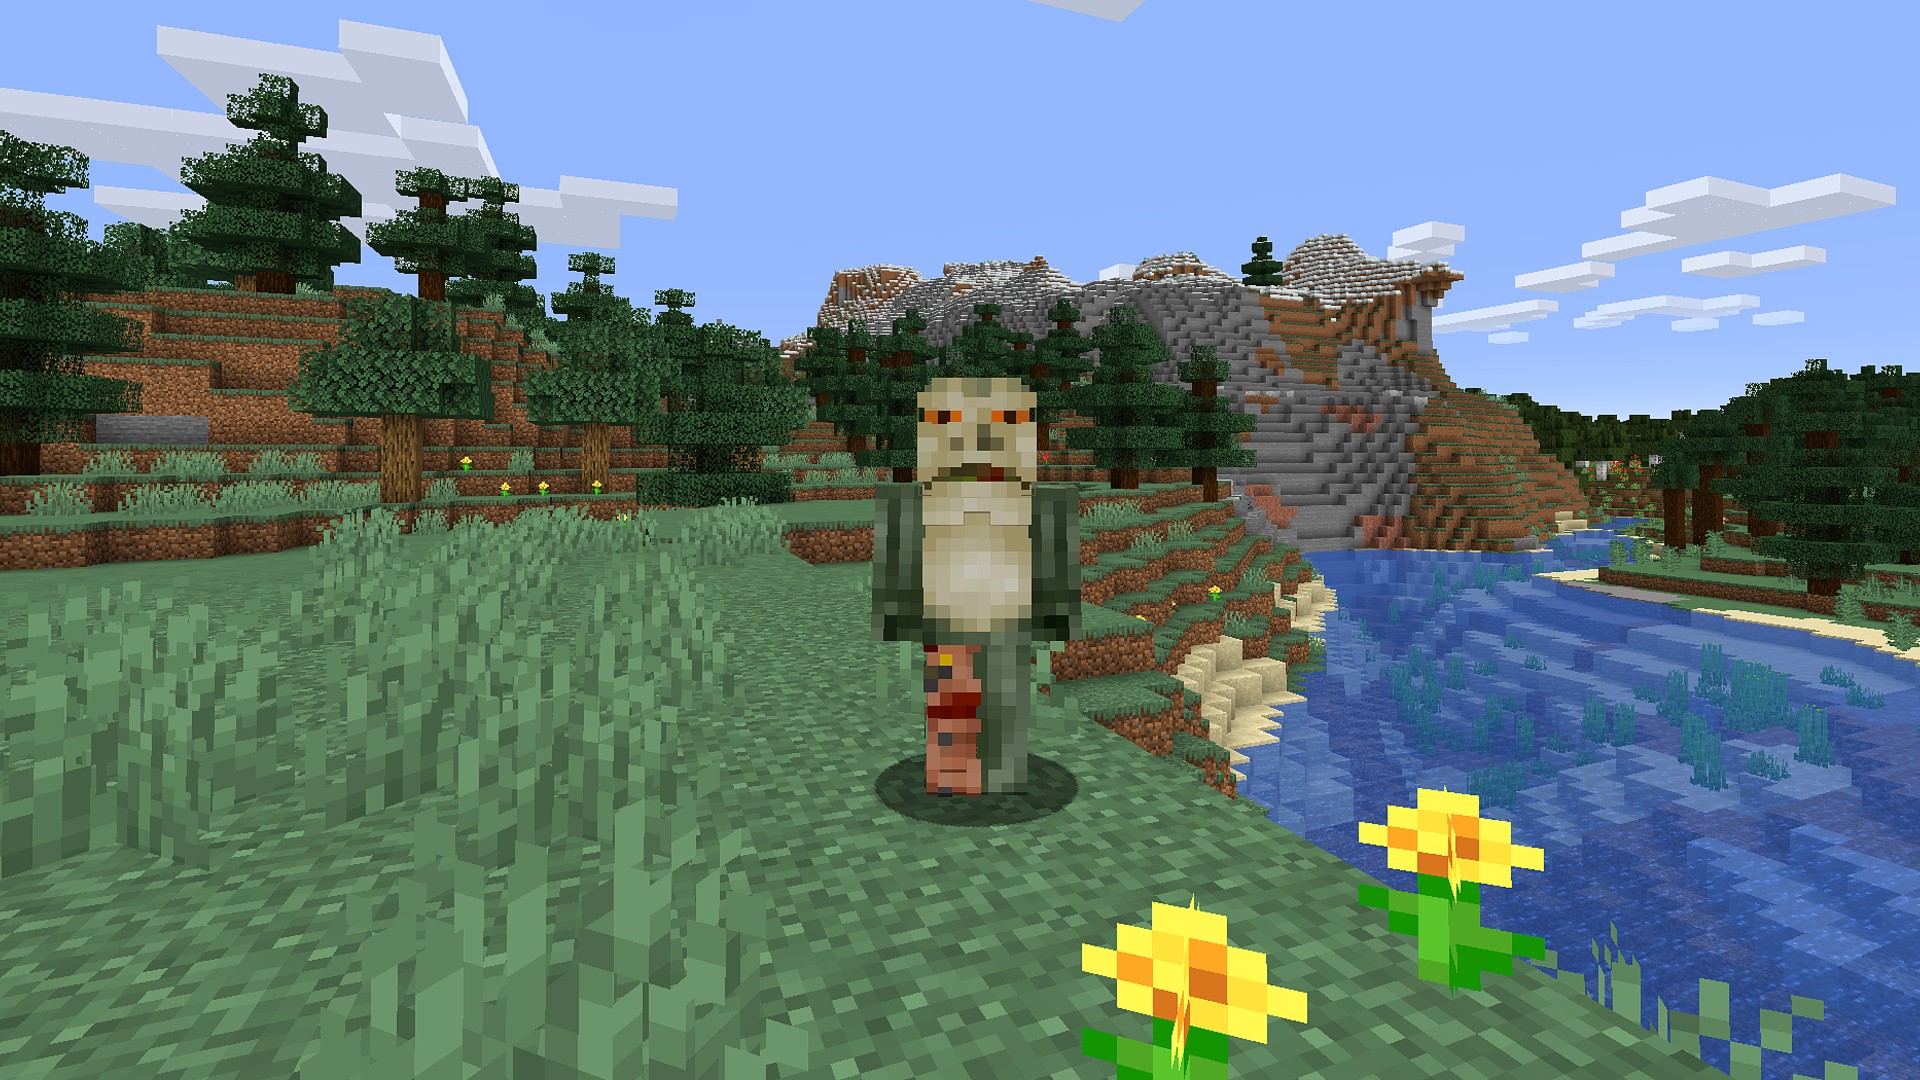 Minecraft skins: Thanos is floating above the ocean as the sun sets.